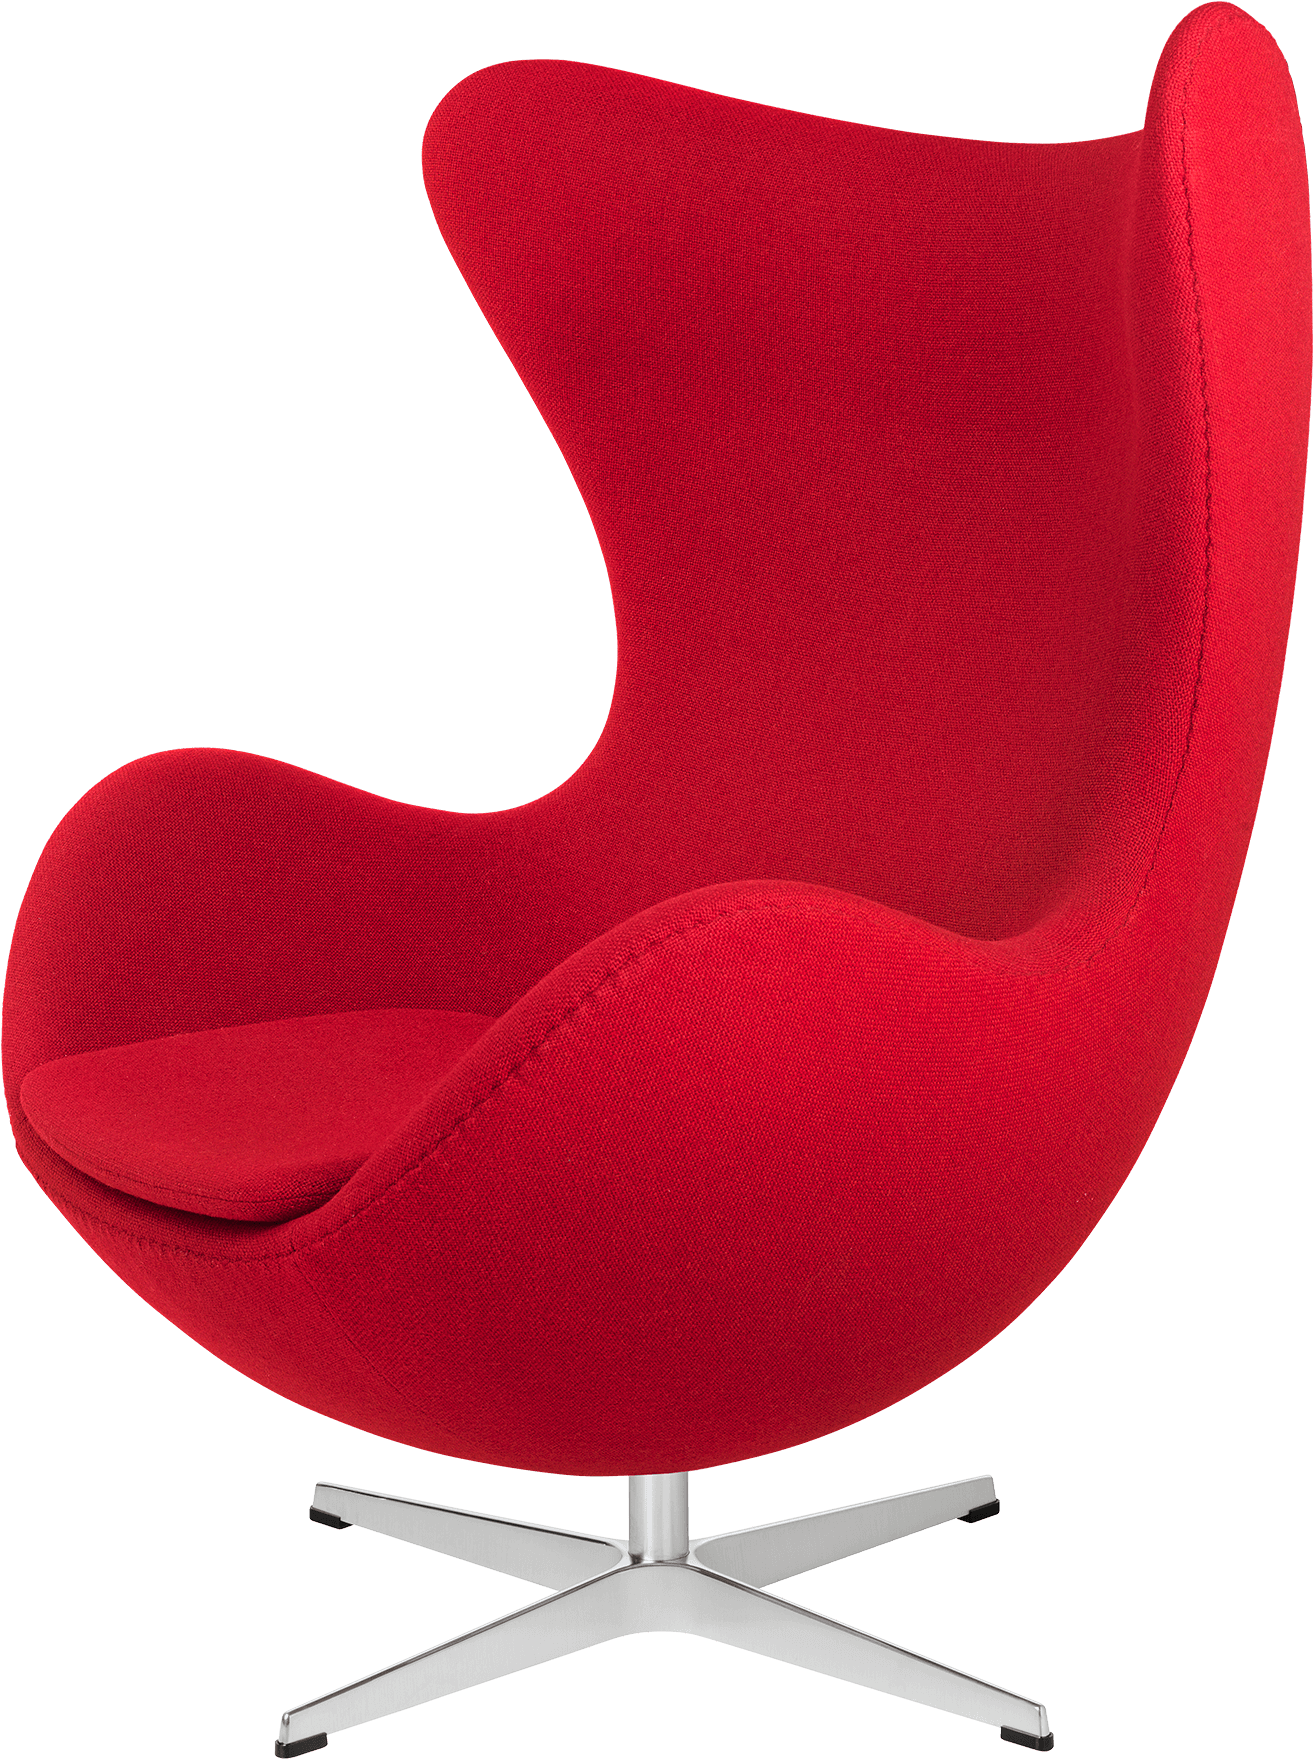 Red Fabric Egg Chair Design